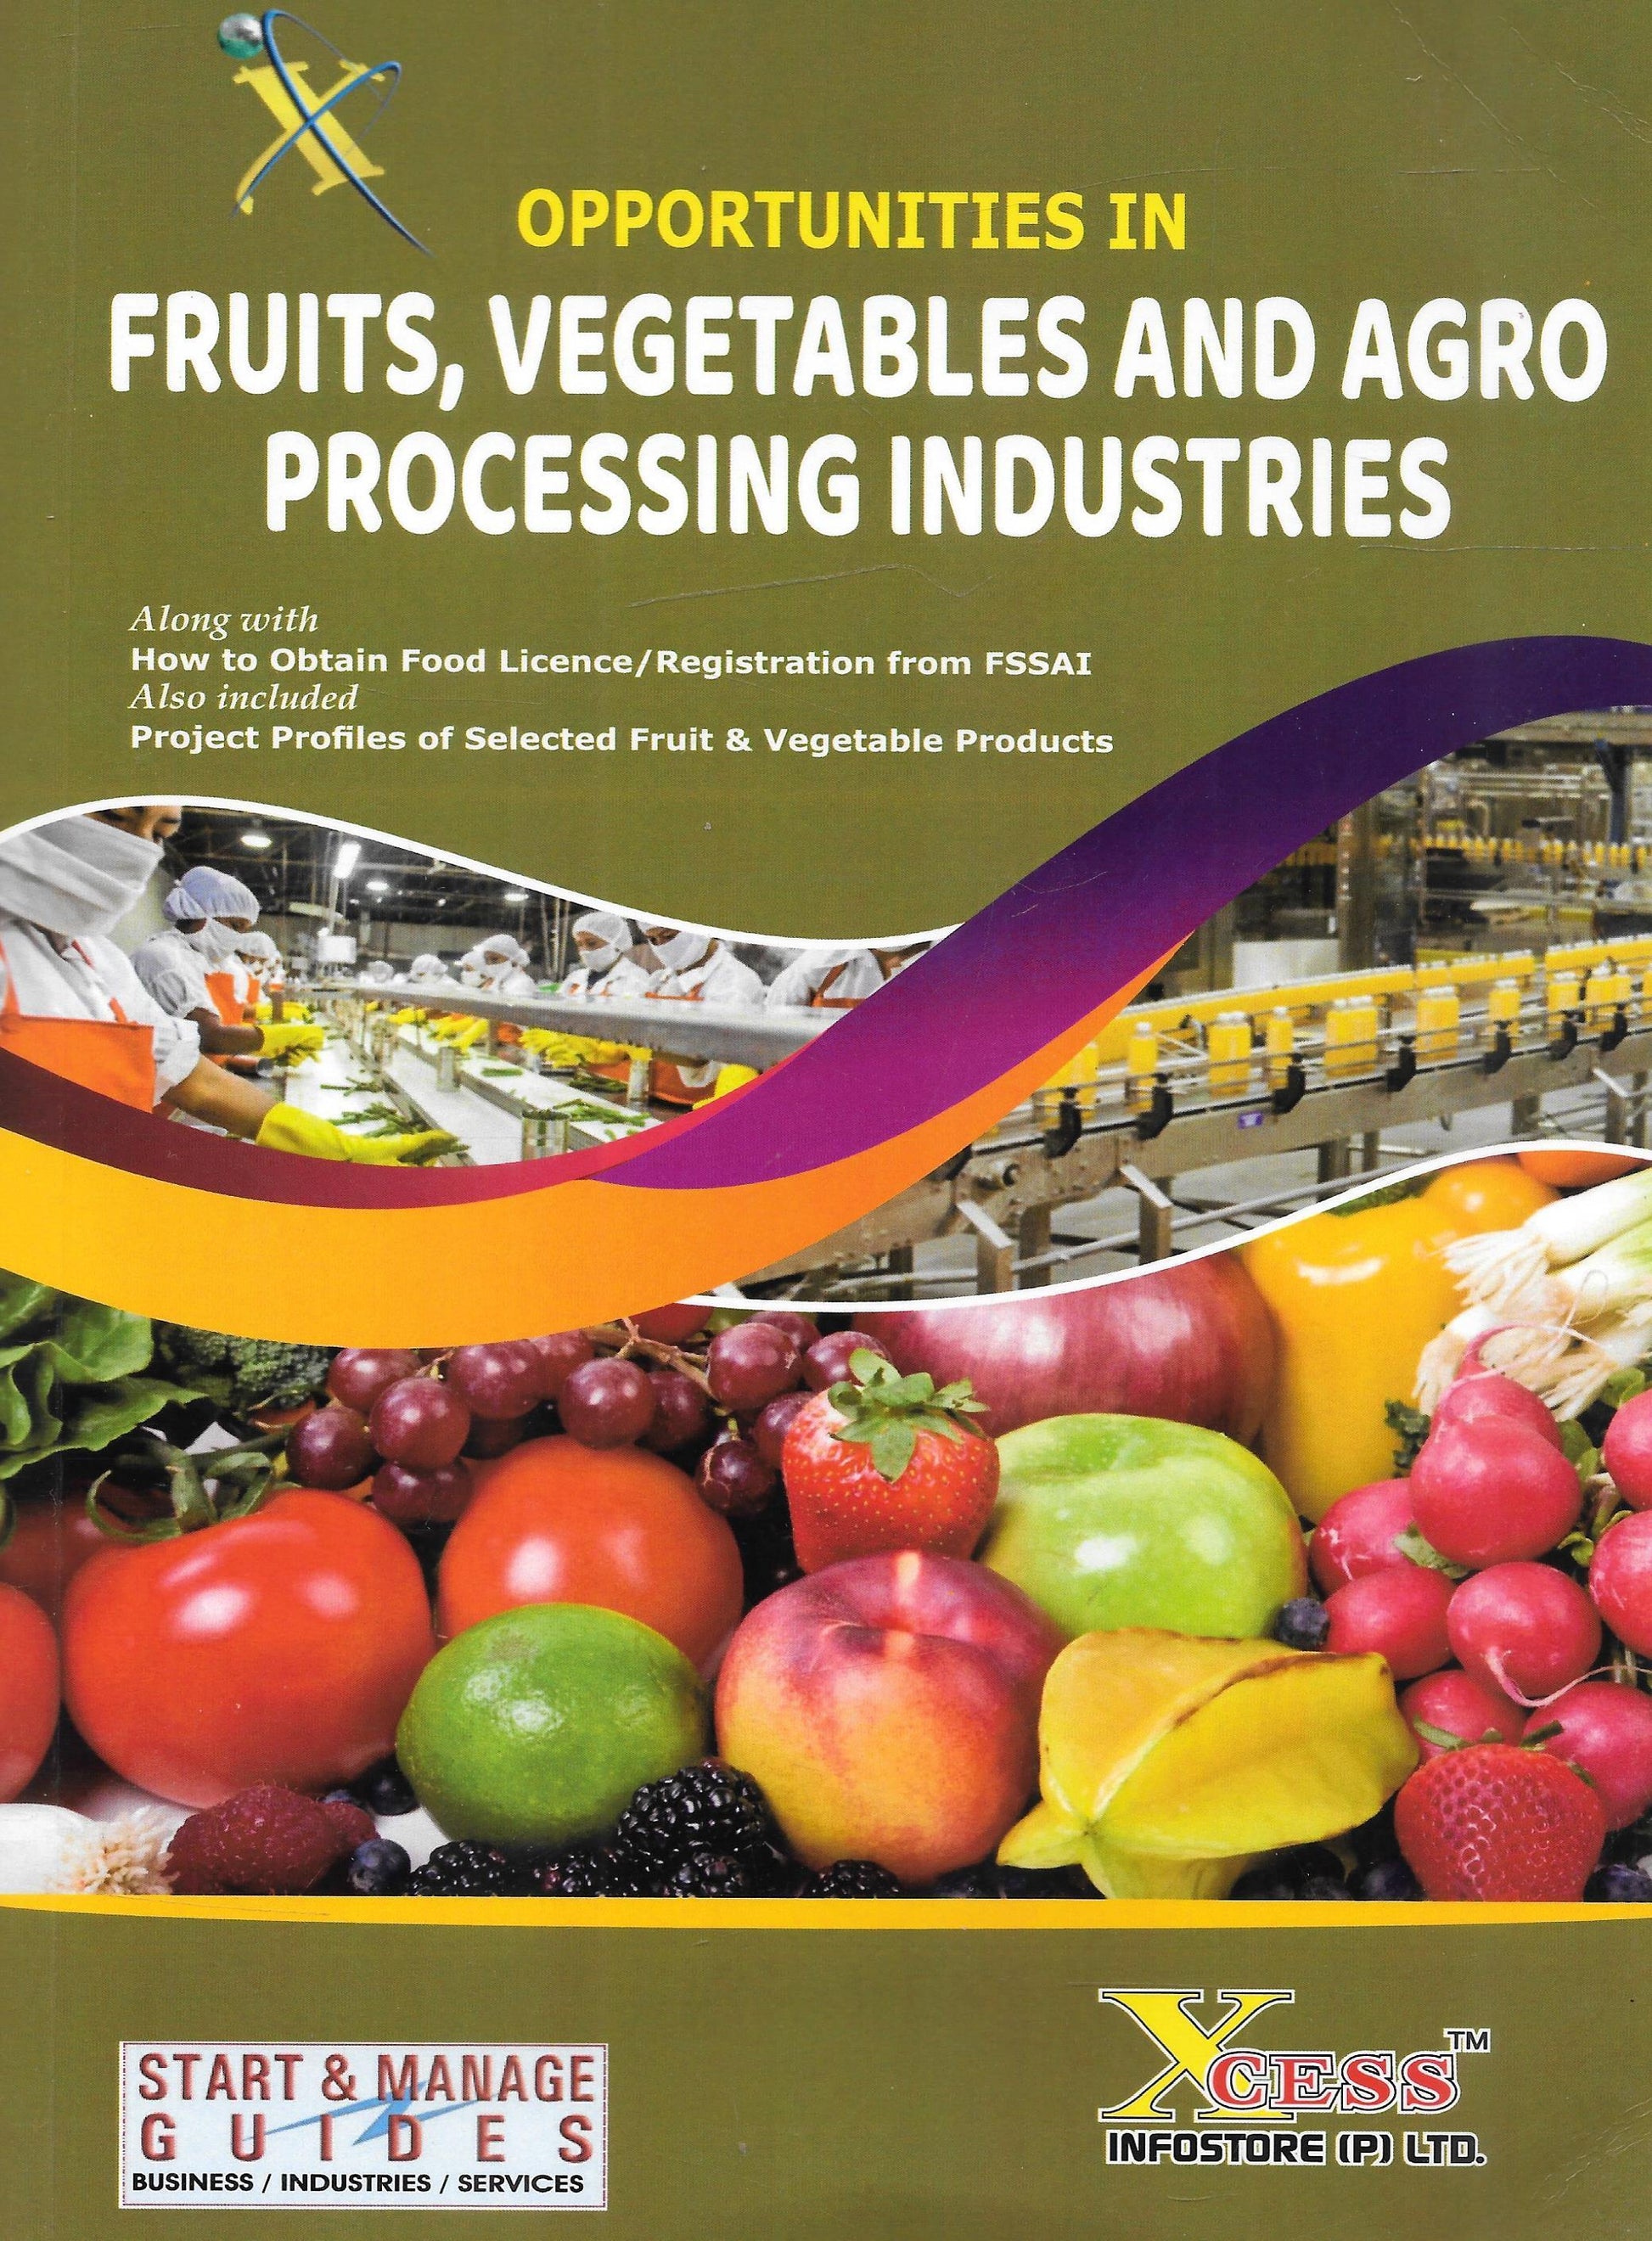 Opportunities in Fruits, Vegetables and Agro Processing Industries - M&J Services